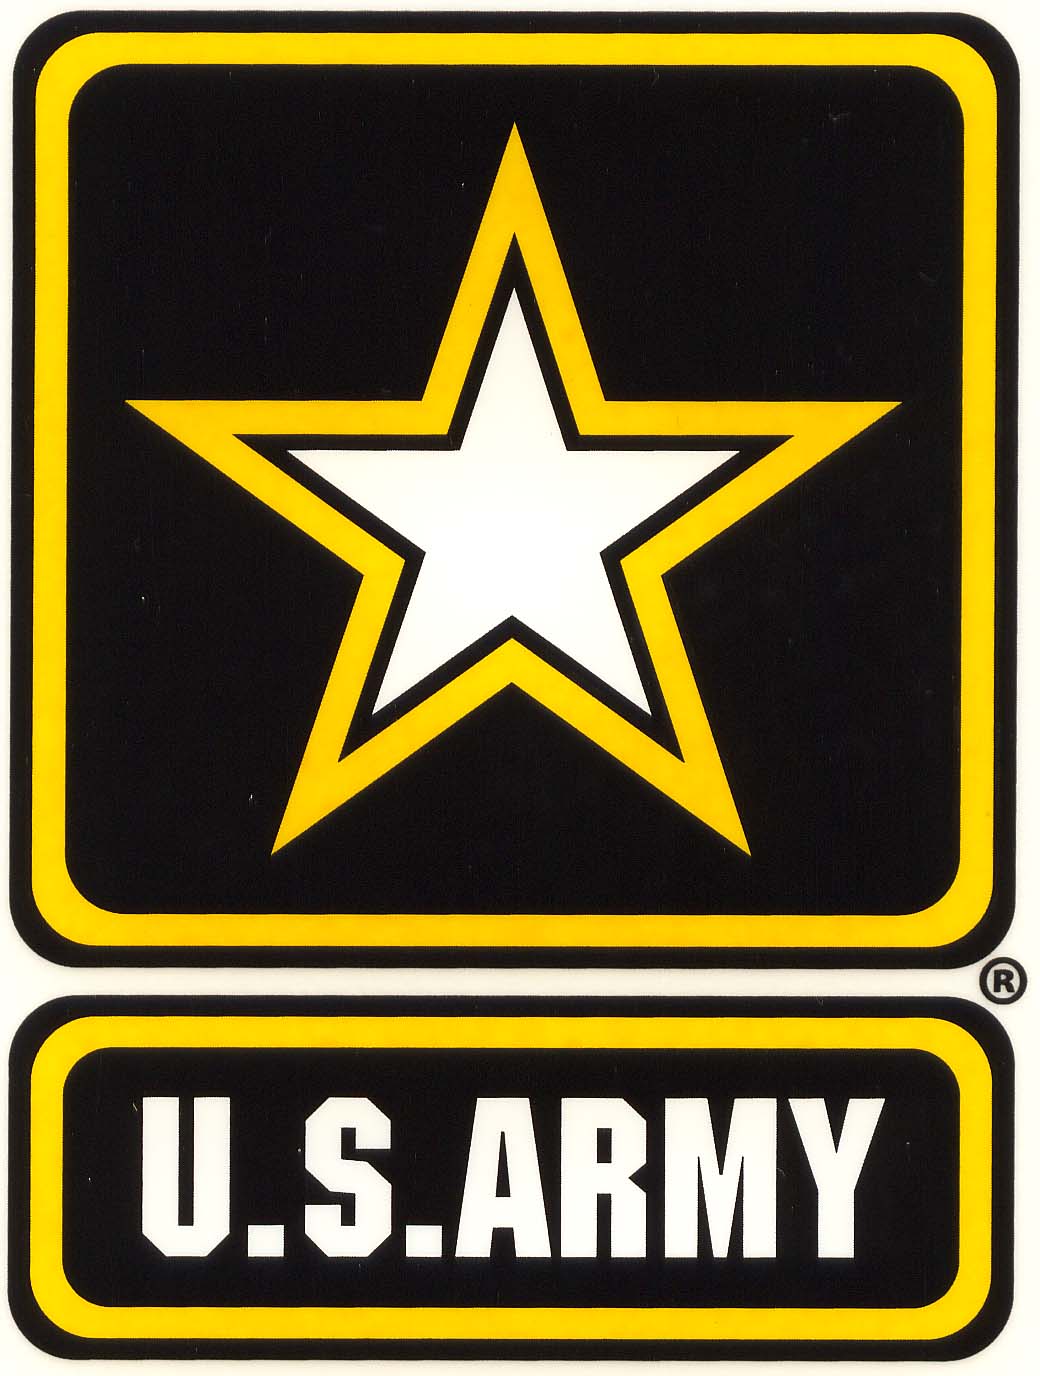 Free army clipart.